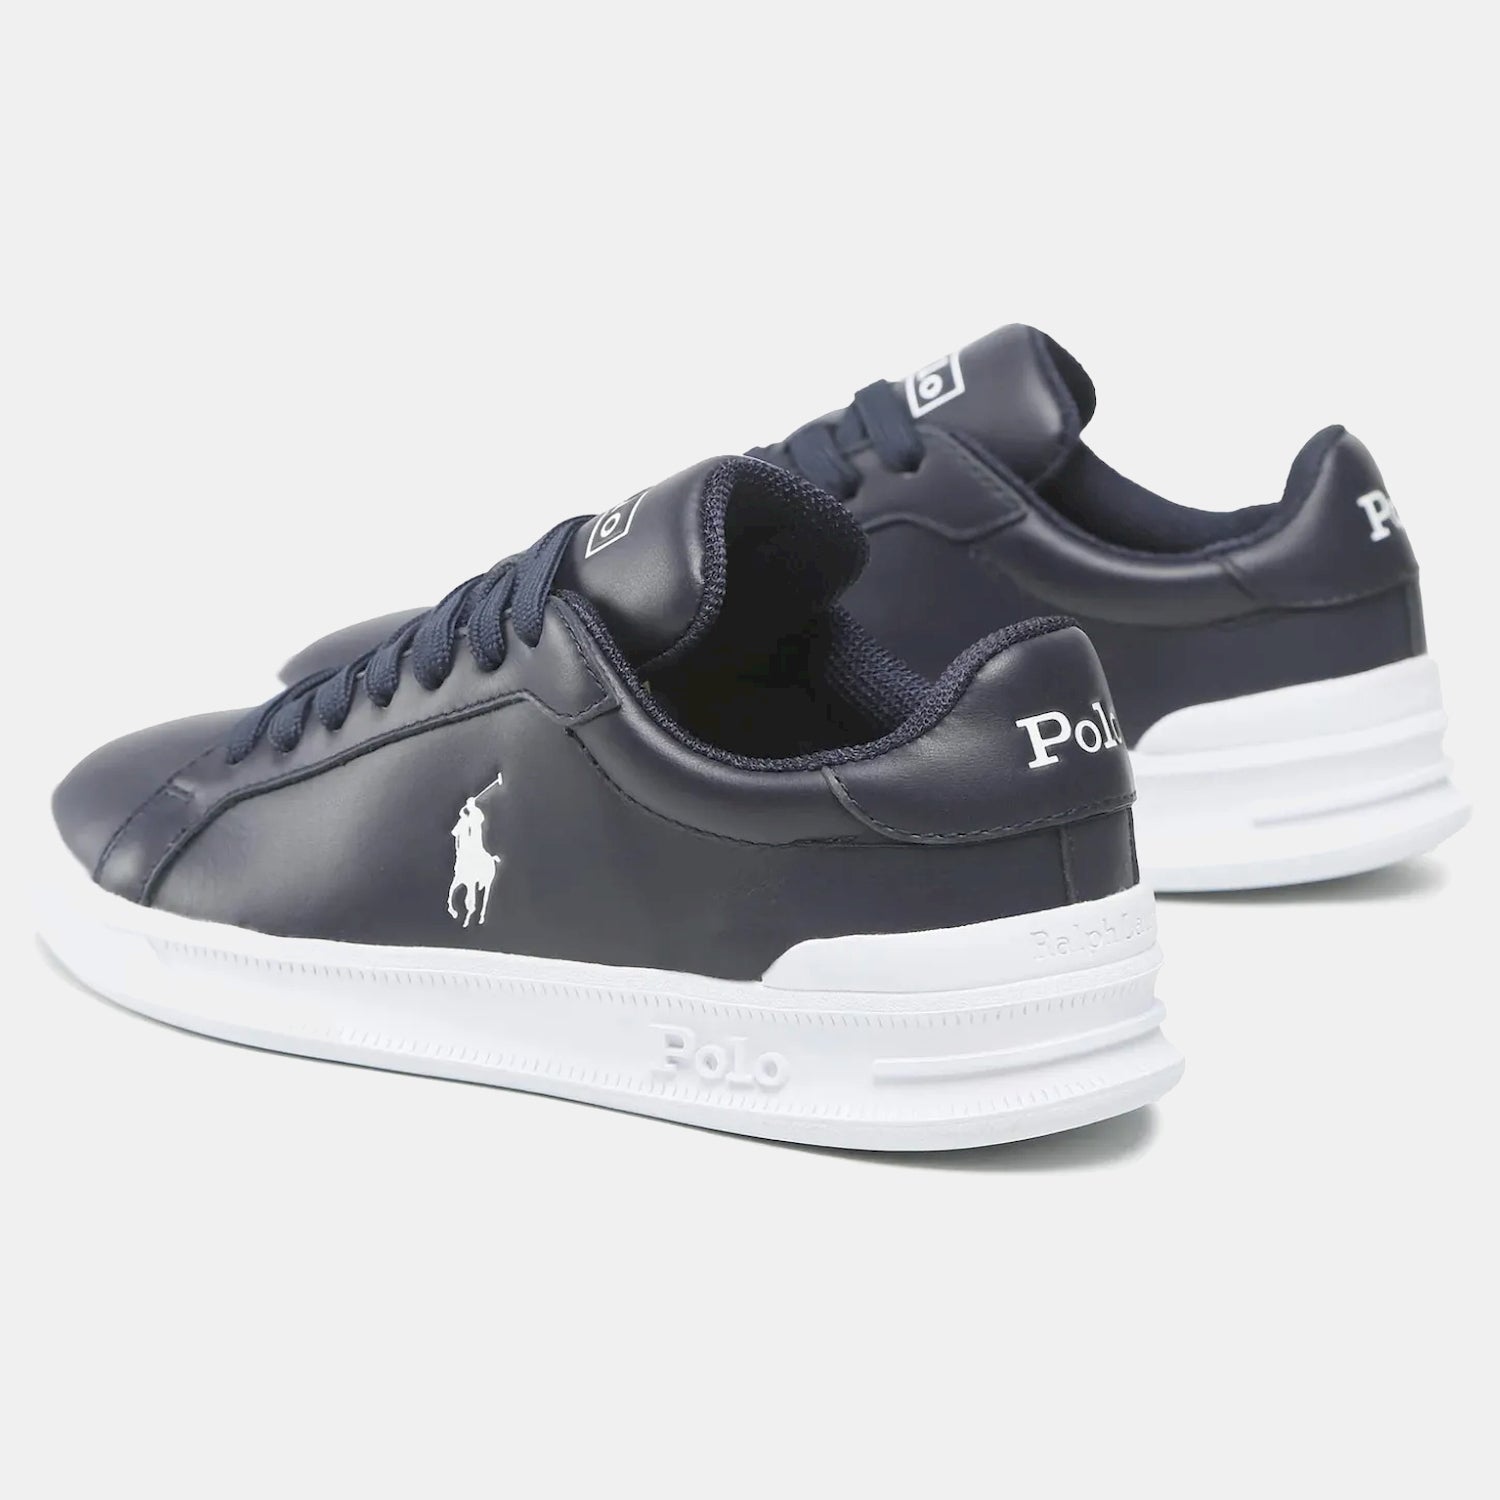 Ralph Lauren Sapatilhas Sneakers Shoes Hrtctii Sk Ath Navy White Navy Branco_shot2